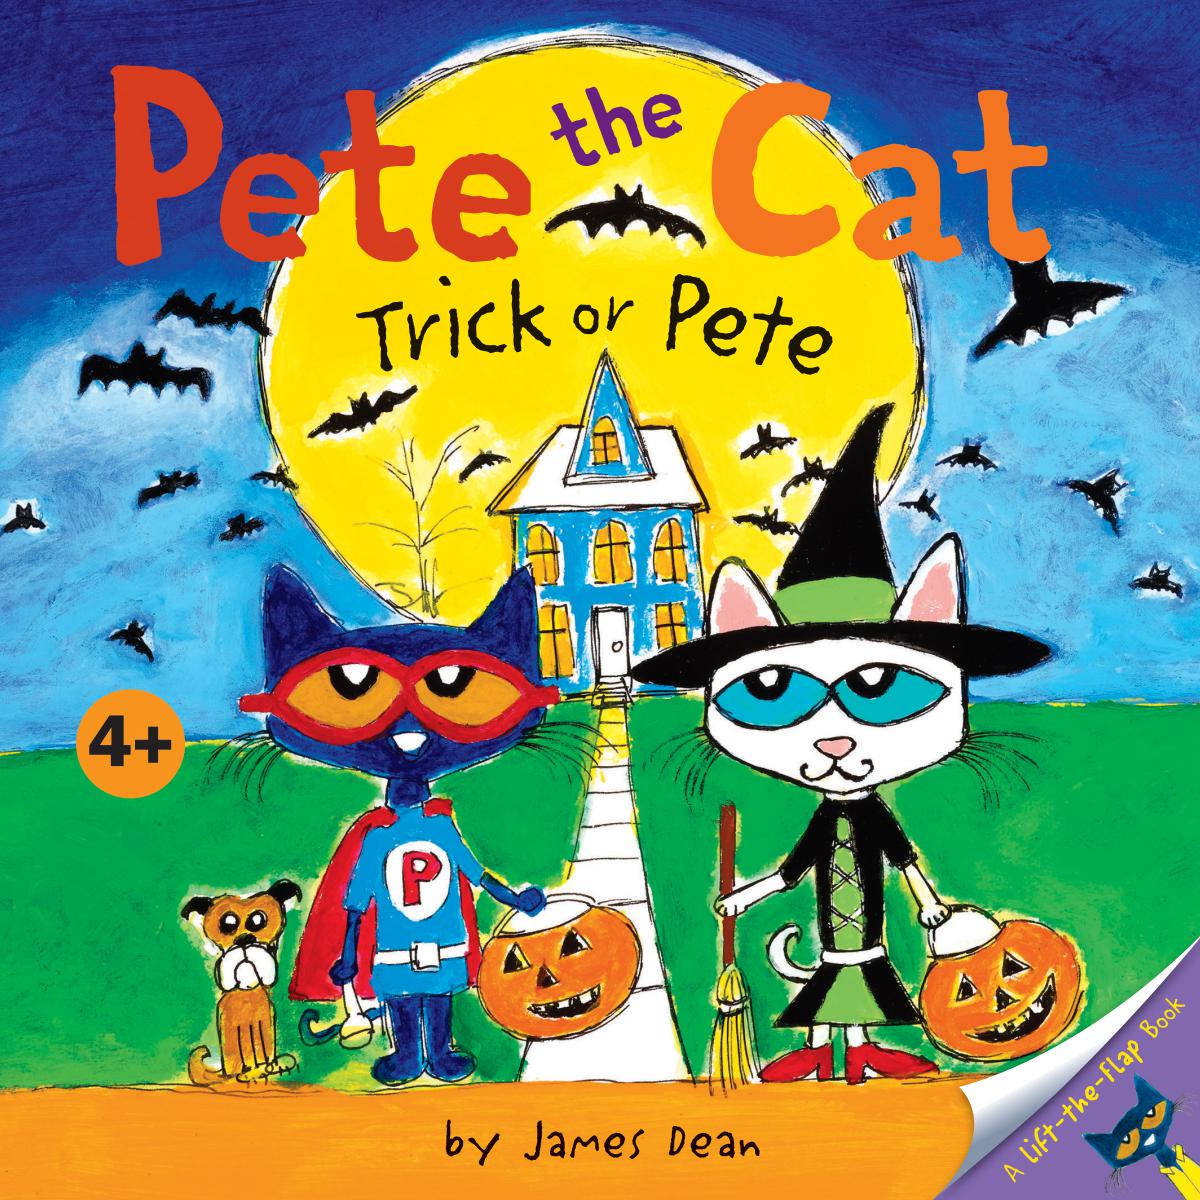  Pete the Cat: Trick or Pete 